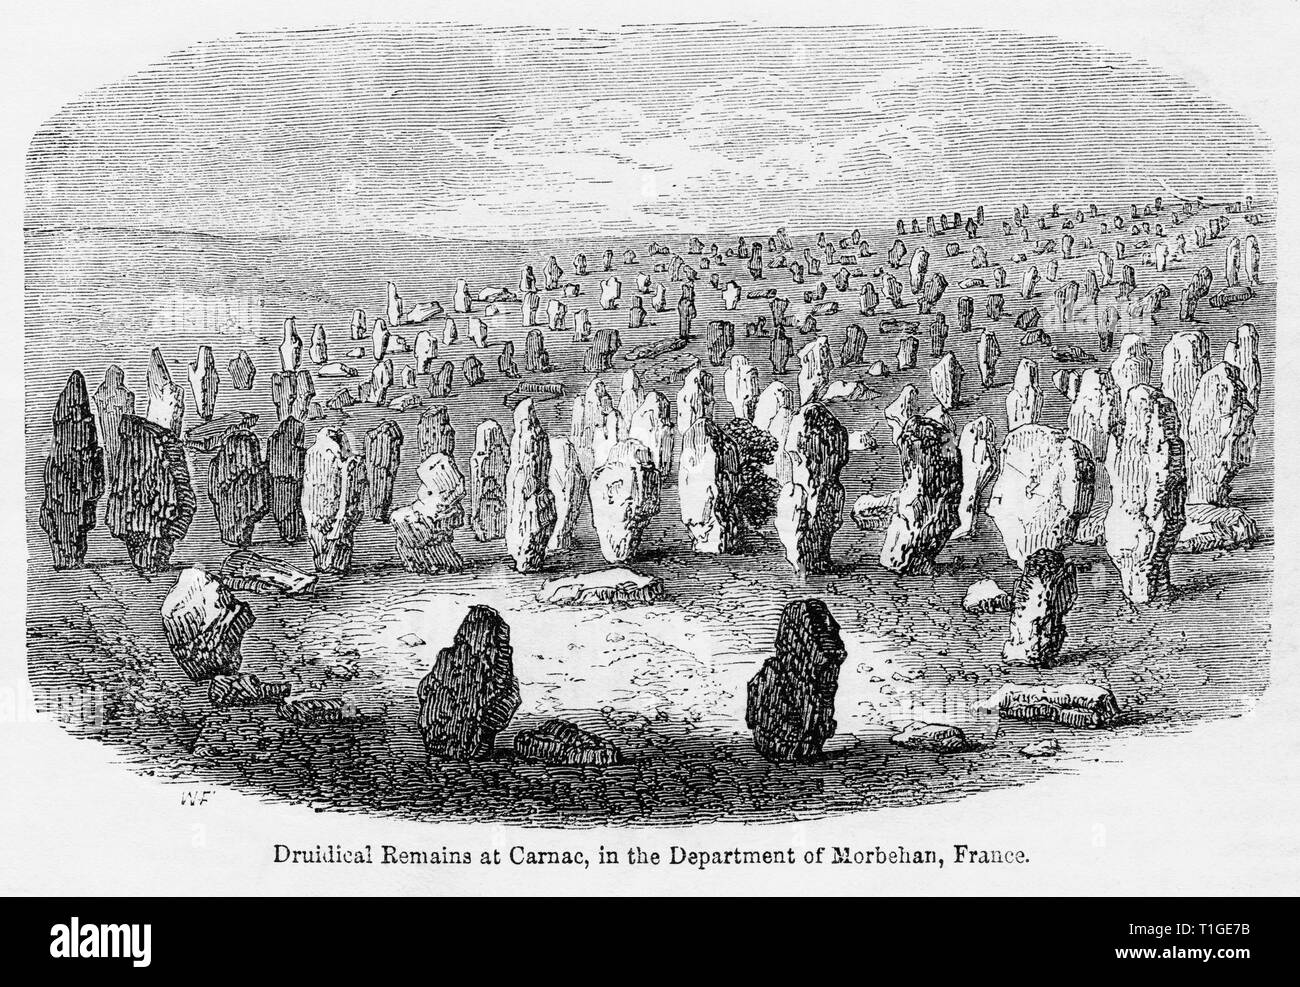 Druidical Remains at Carnac, in the Department of Morbehan, France, Illustration from John Cassell's Illustrated History of England, Vol. I from the earliest period to the reign of Edward the Fourth, Cassell, Petter and Galpin, 1857 Stock Photo